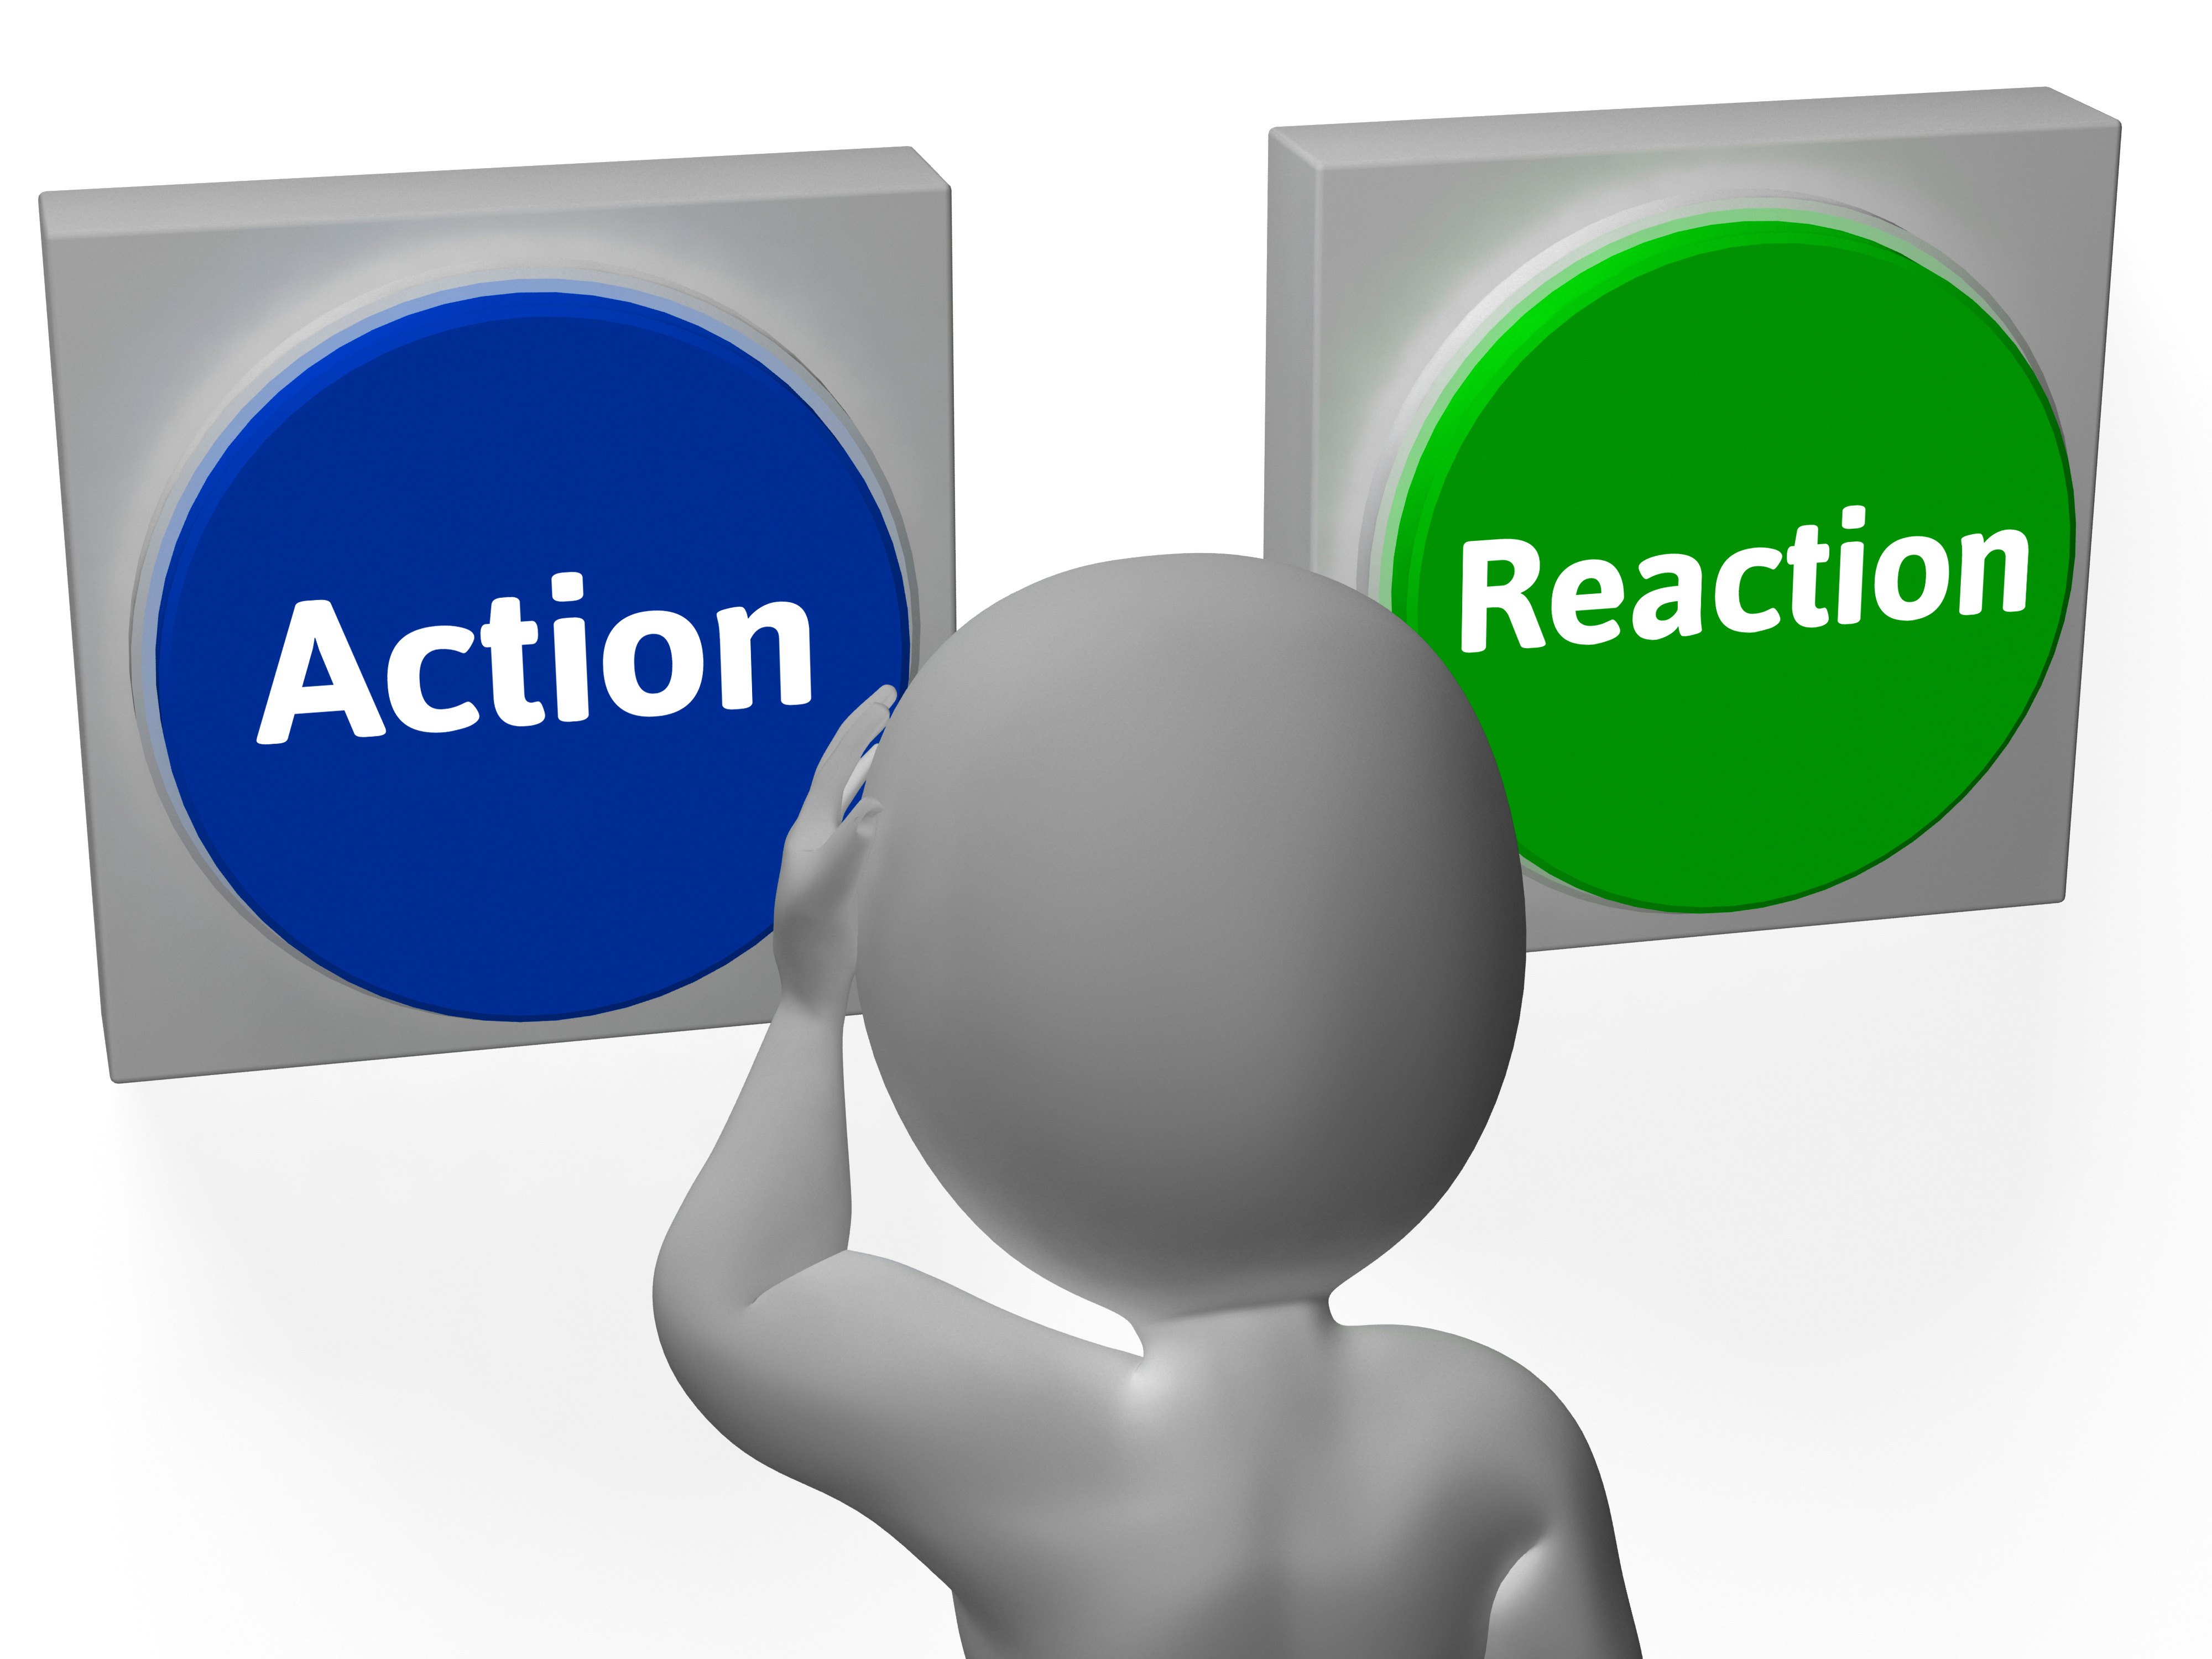 Action Reaction Buttons Showing Control Or Effect